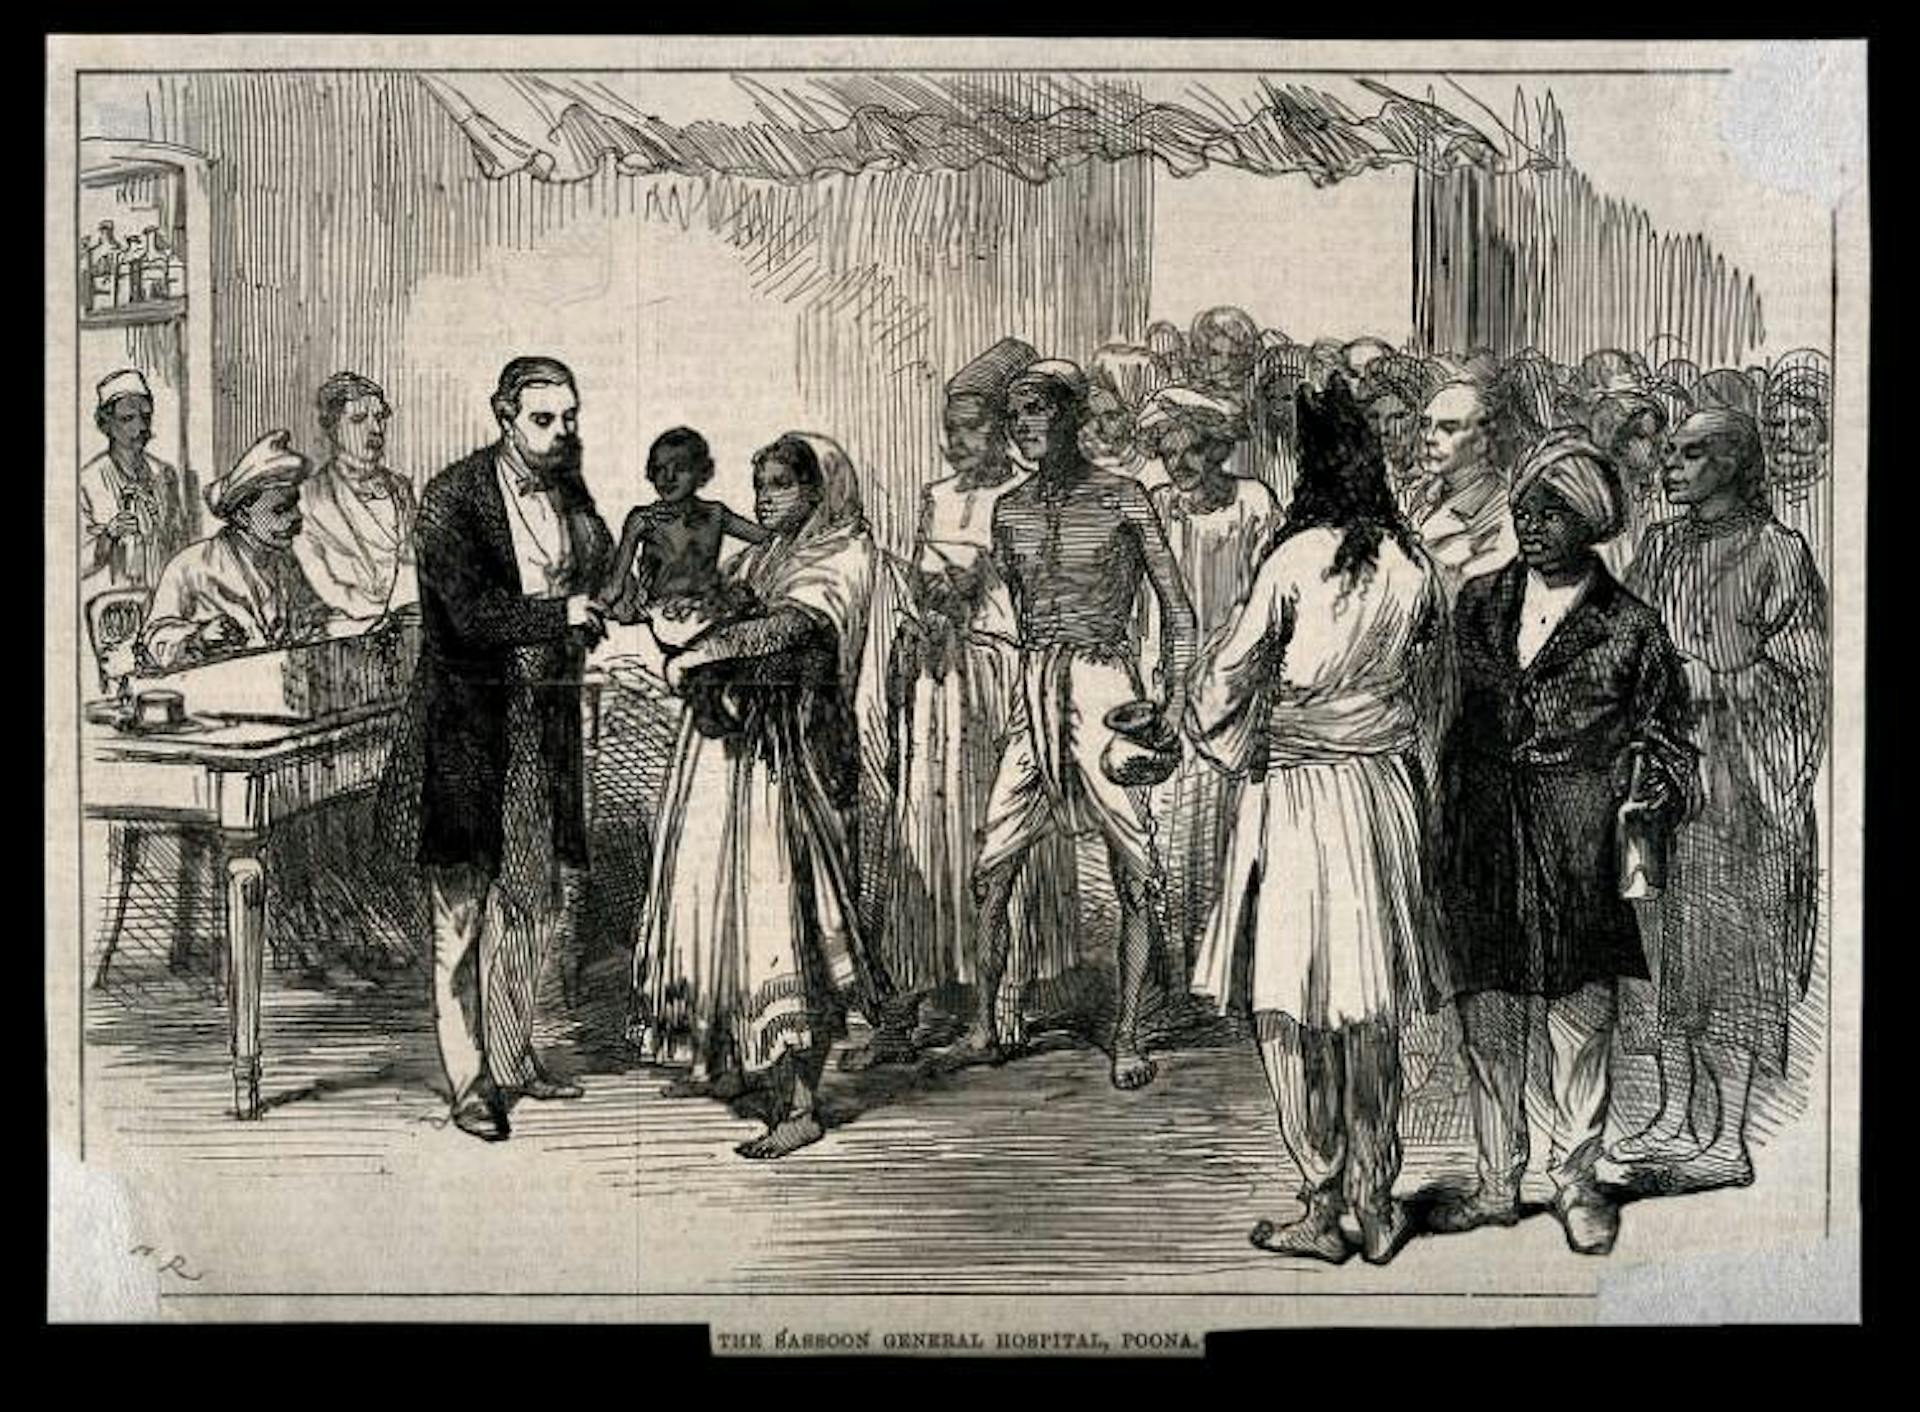 A wood engraving of patients awaiting treatment at the Sassoon General Hospital, Poona. It was published in an August 1879 edition of The Illustrated London News. Courtesy: Wellcome Library